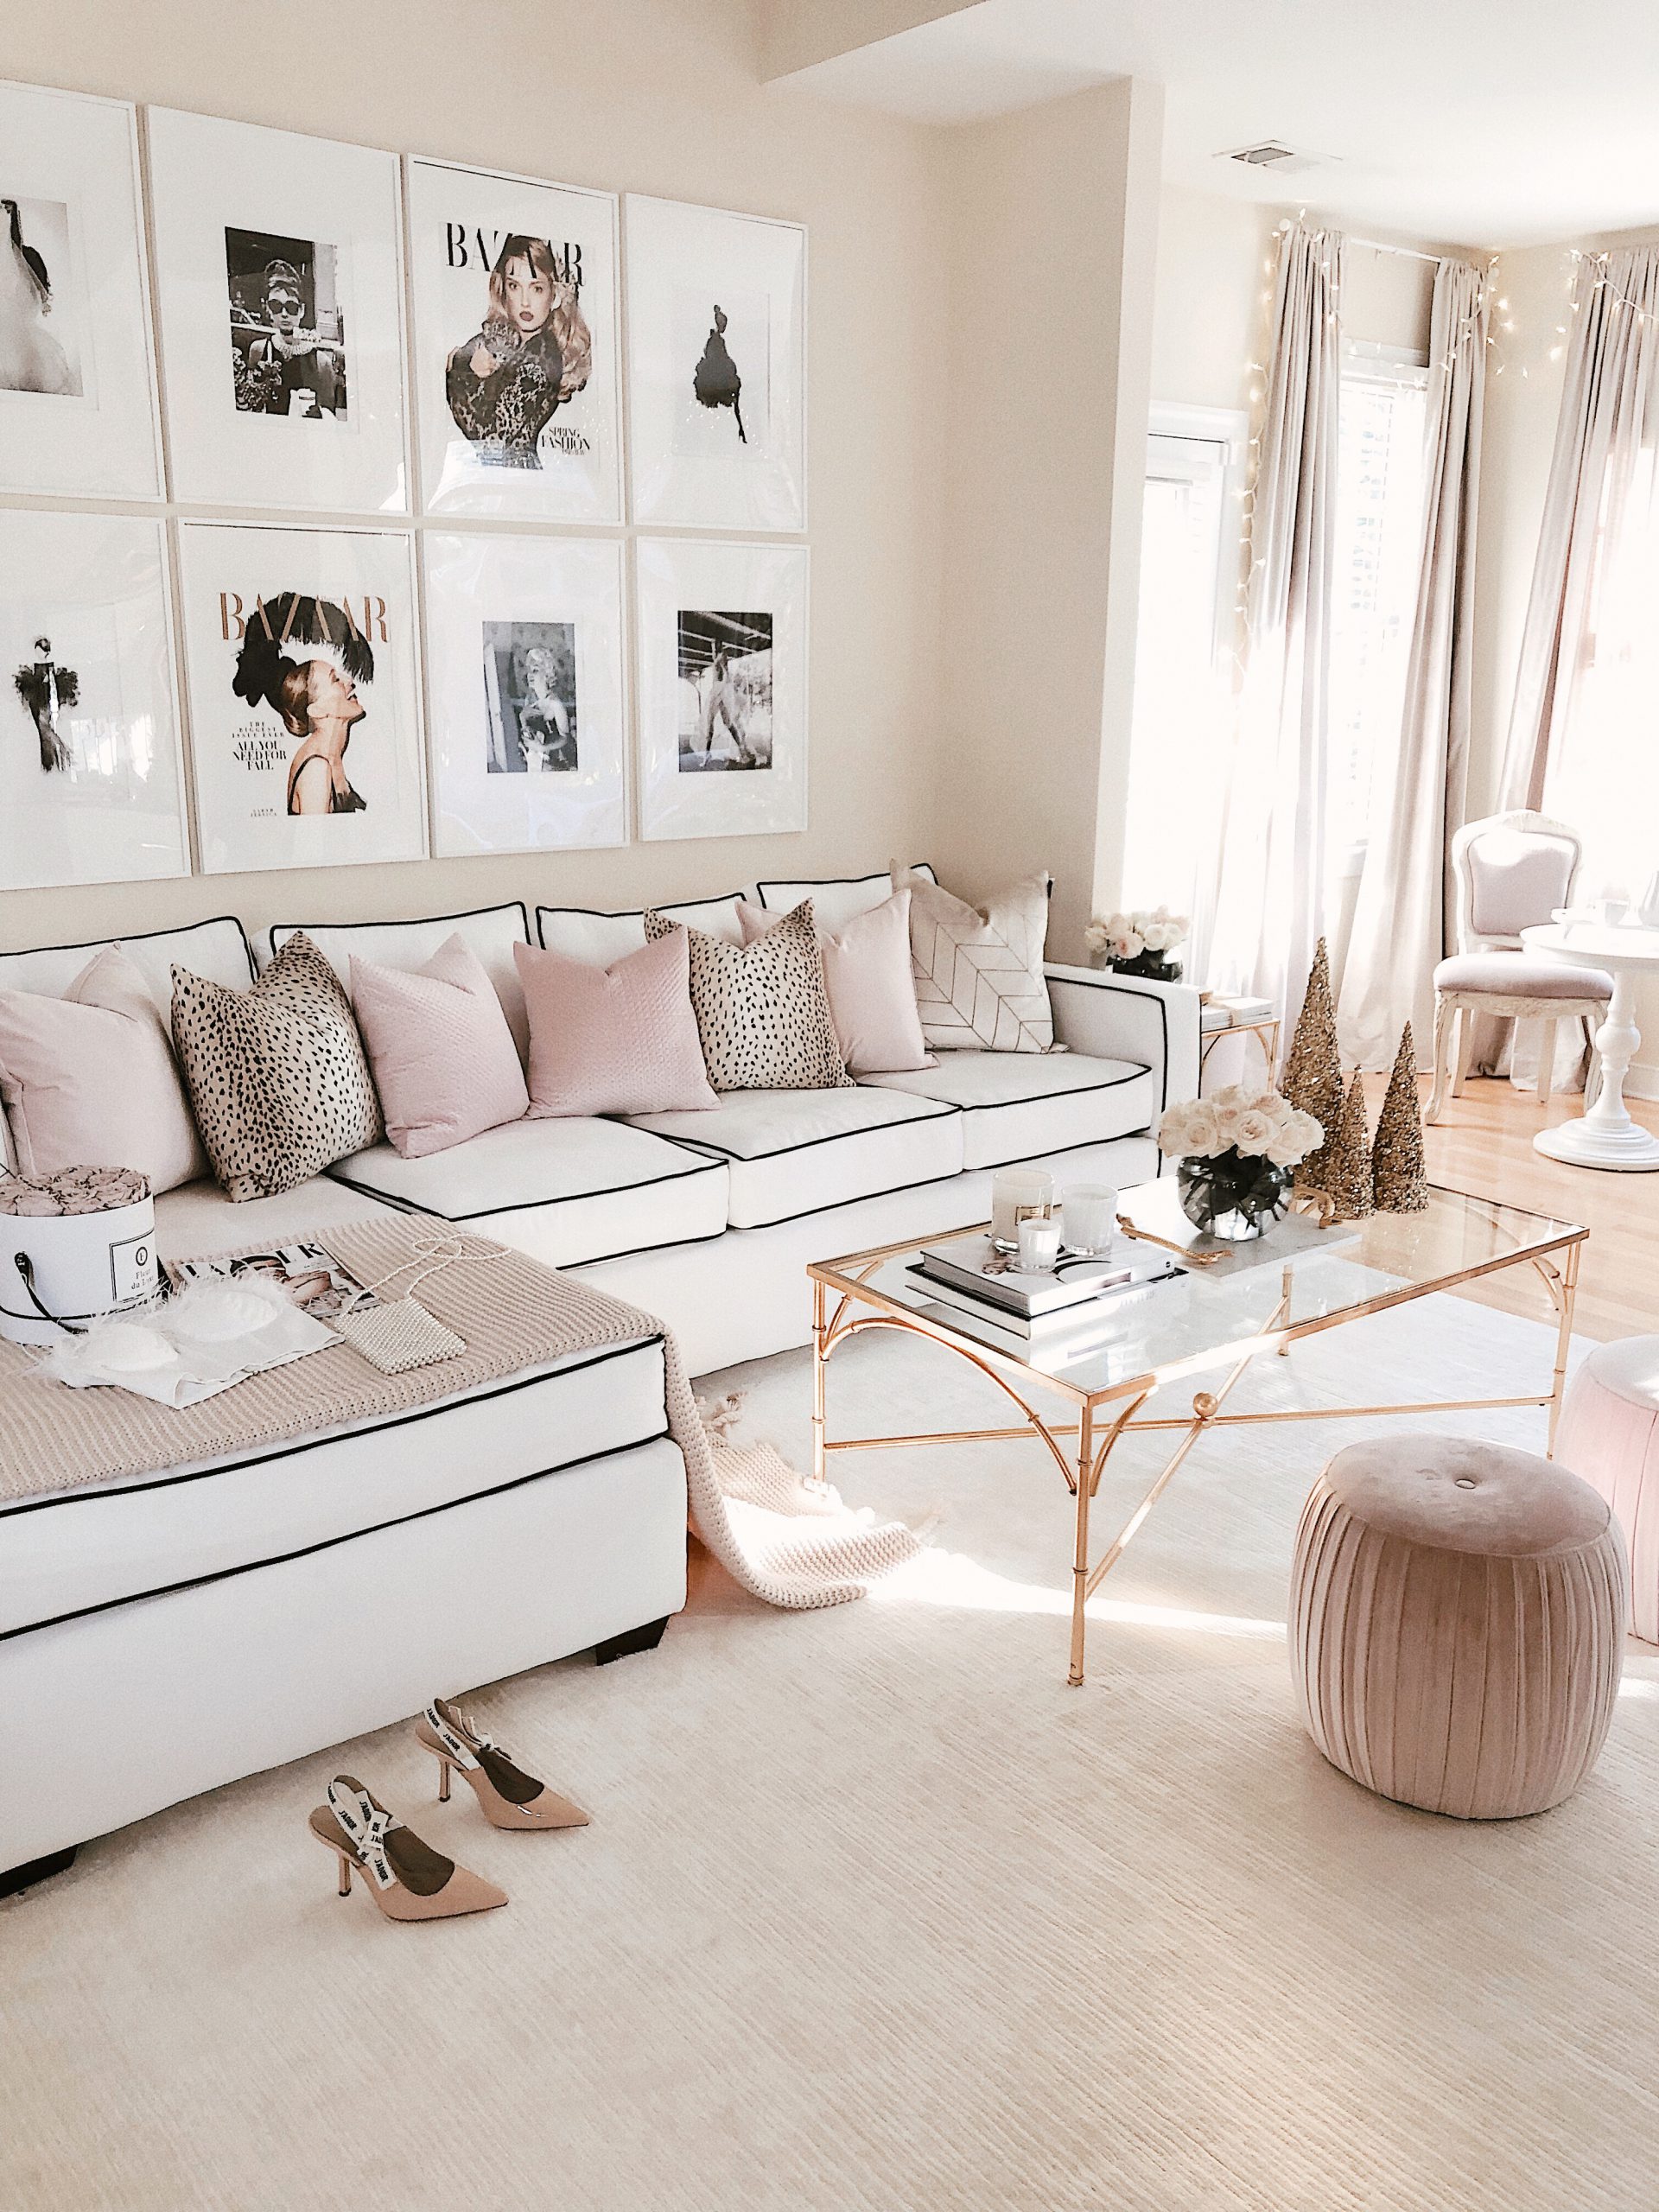 Chanel & Glam Inspired living room makeover – J'adore Lexie Couture